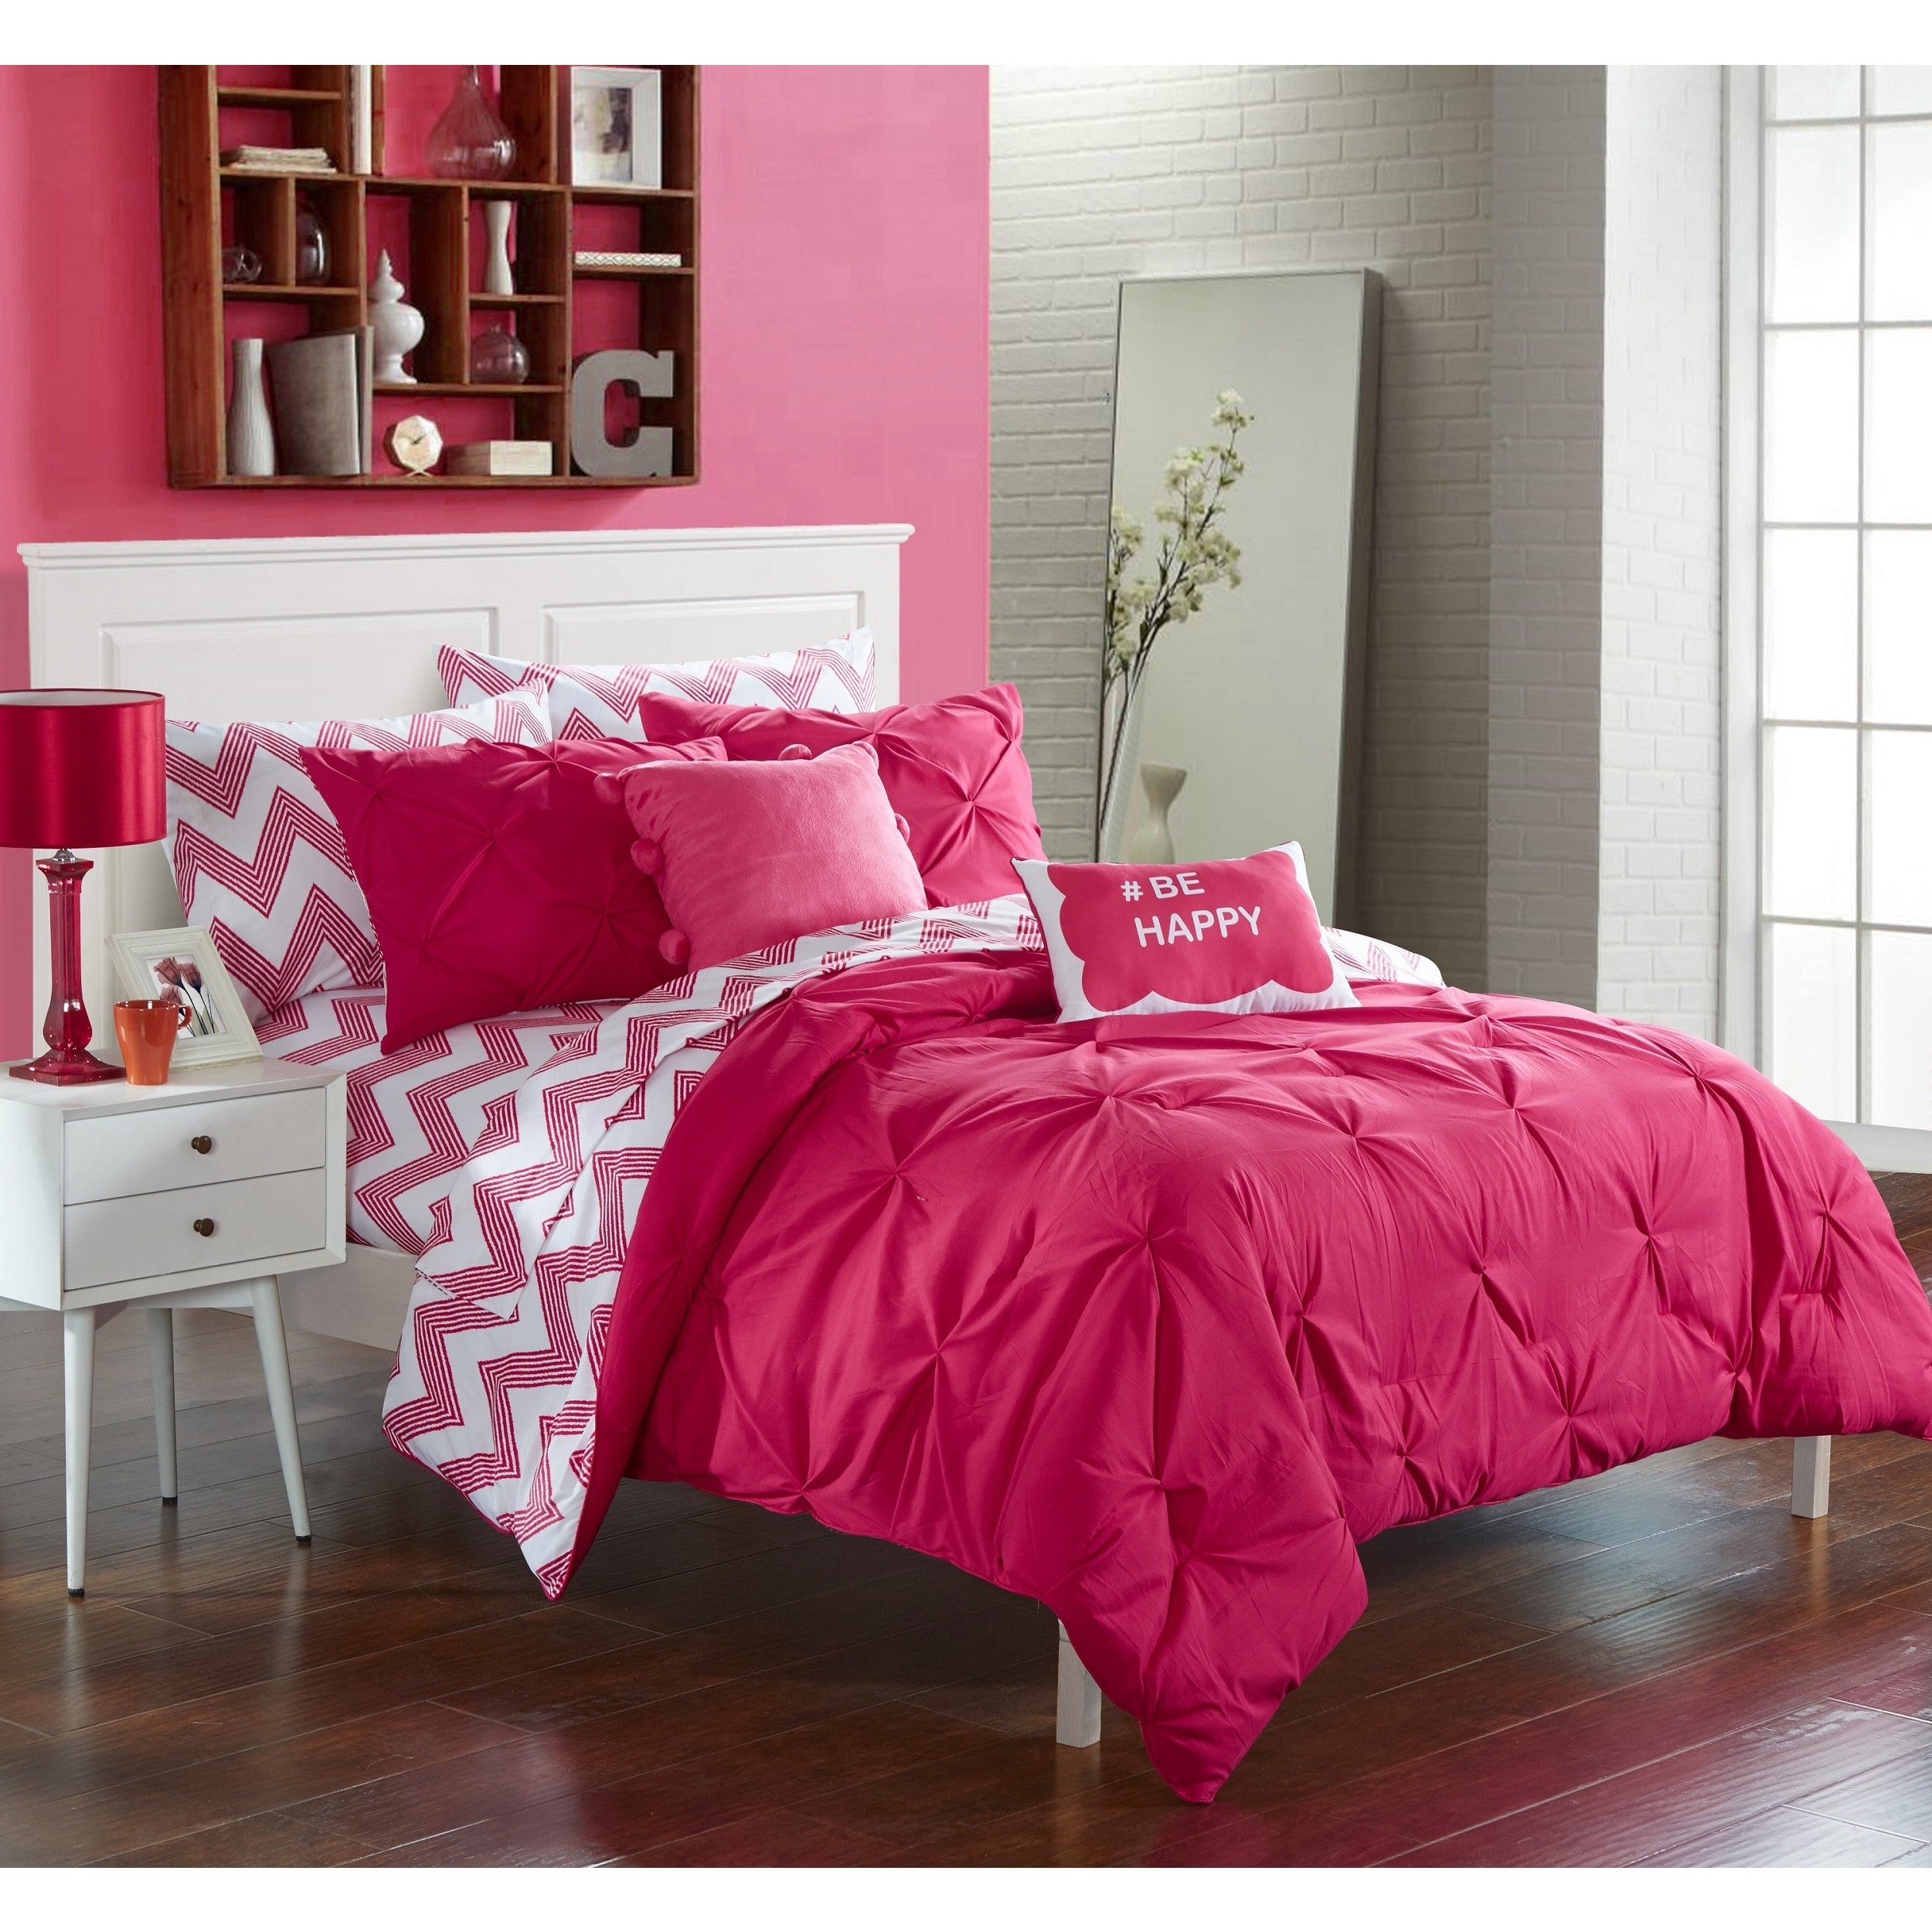 Shop Chic Home Foxville Fuchsia 9 Piece Bed In A Bag With Sheet